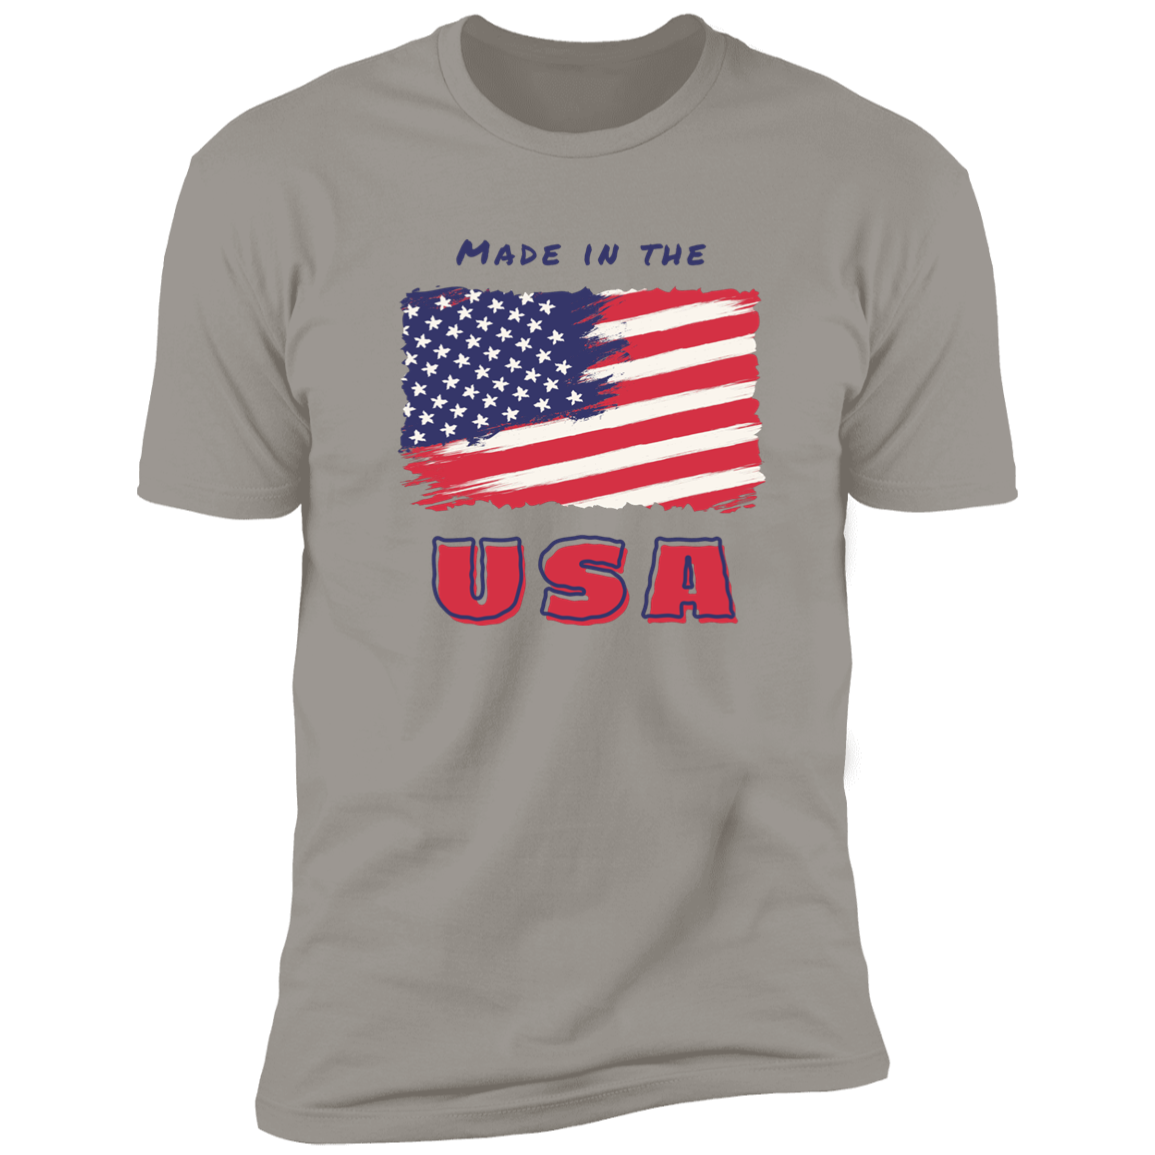 Made in the USA! Tee